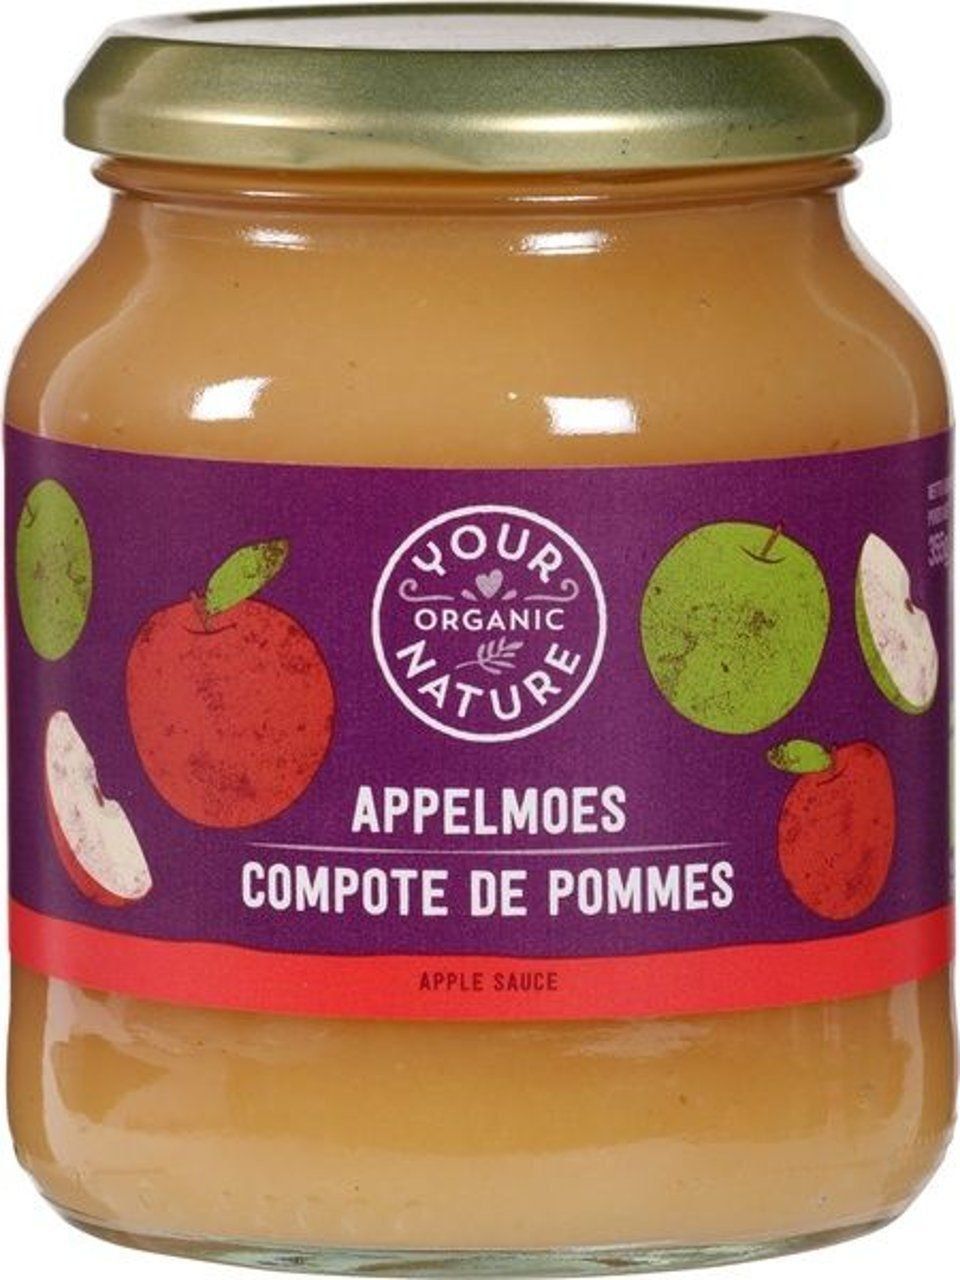 YOUR ORGANIC NATURE Appelmoes